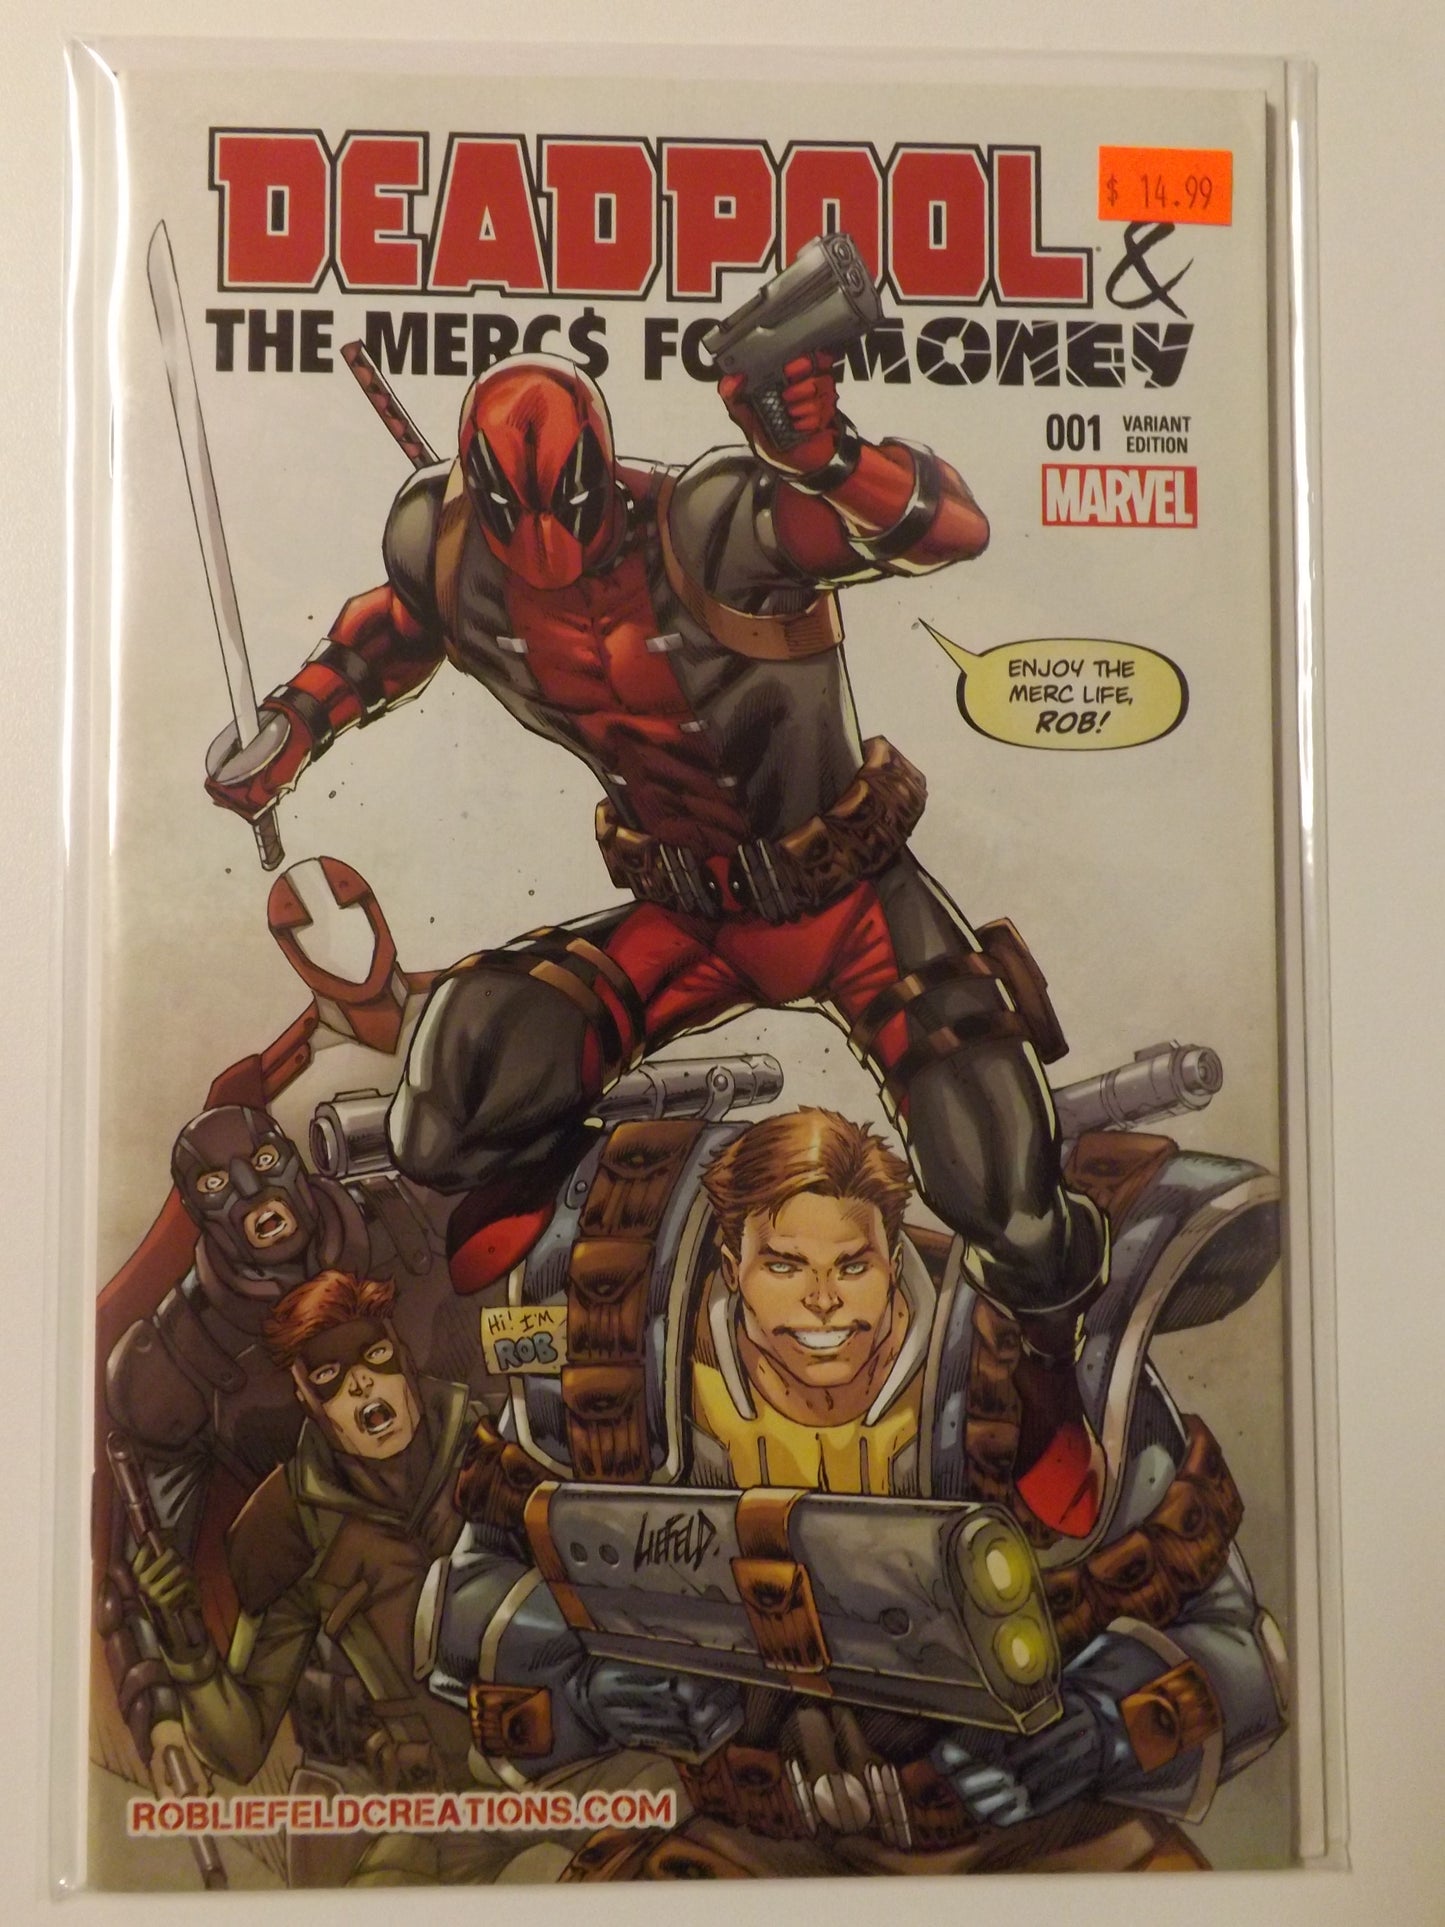 Deadpool & The Mercs For Money #1 (Series 1) Rob Liefeld Creations Variant